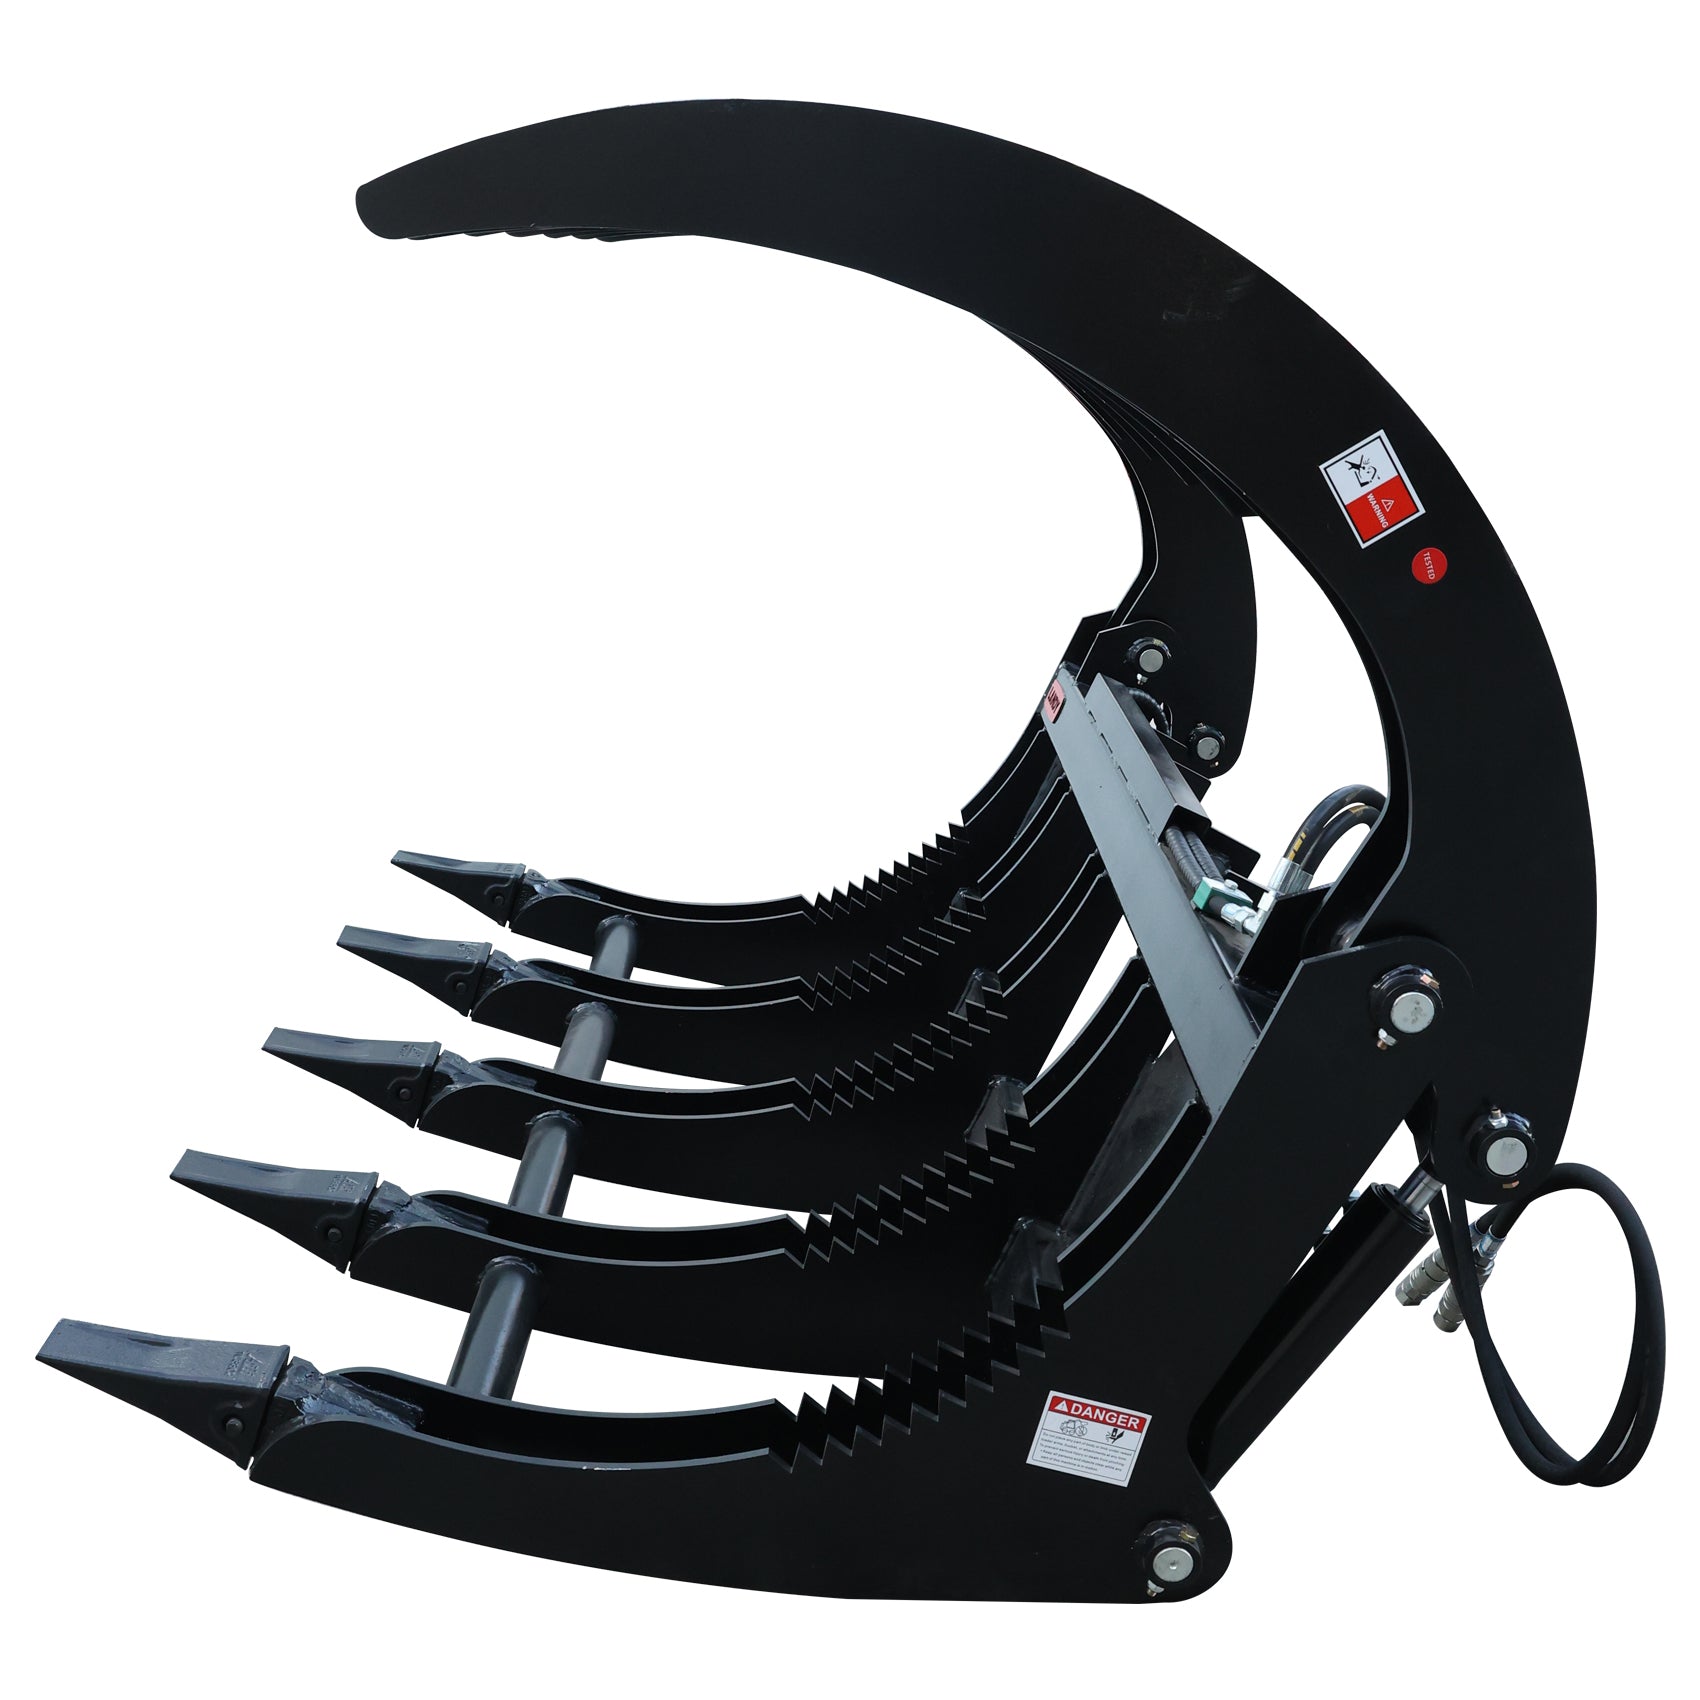 Landy Attachments 72'' Extreme Skid Steer Root Grapple Rake Universal Mount